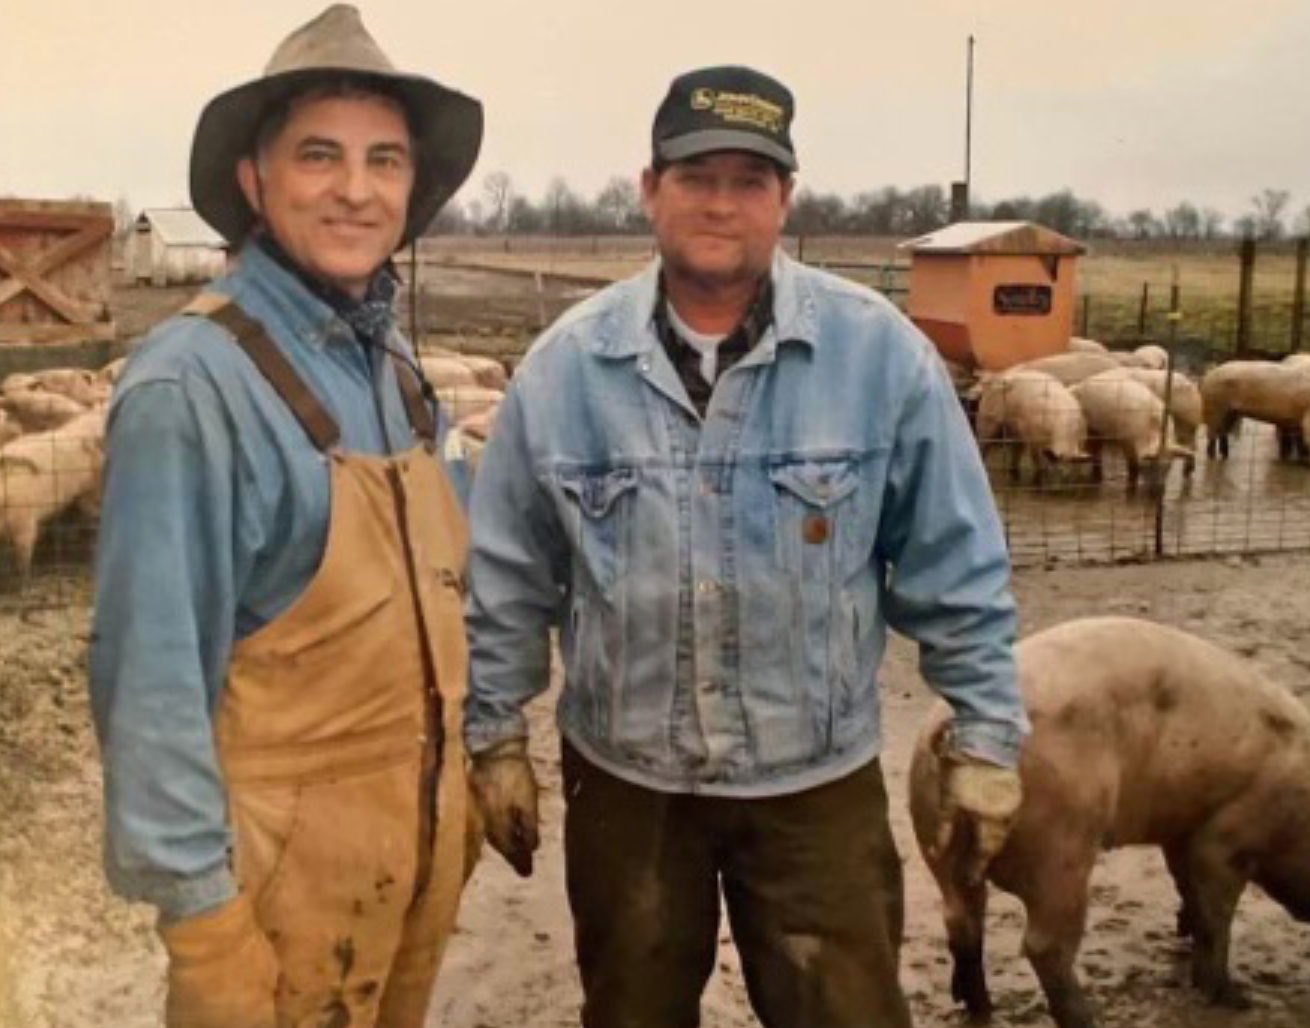 Two hog farmers with hogs; image courtesy of press release.